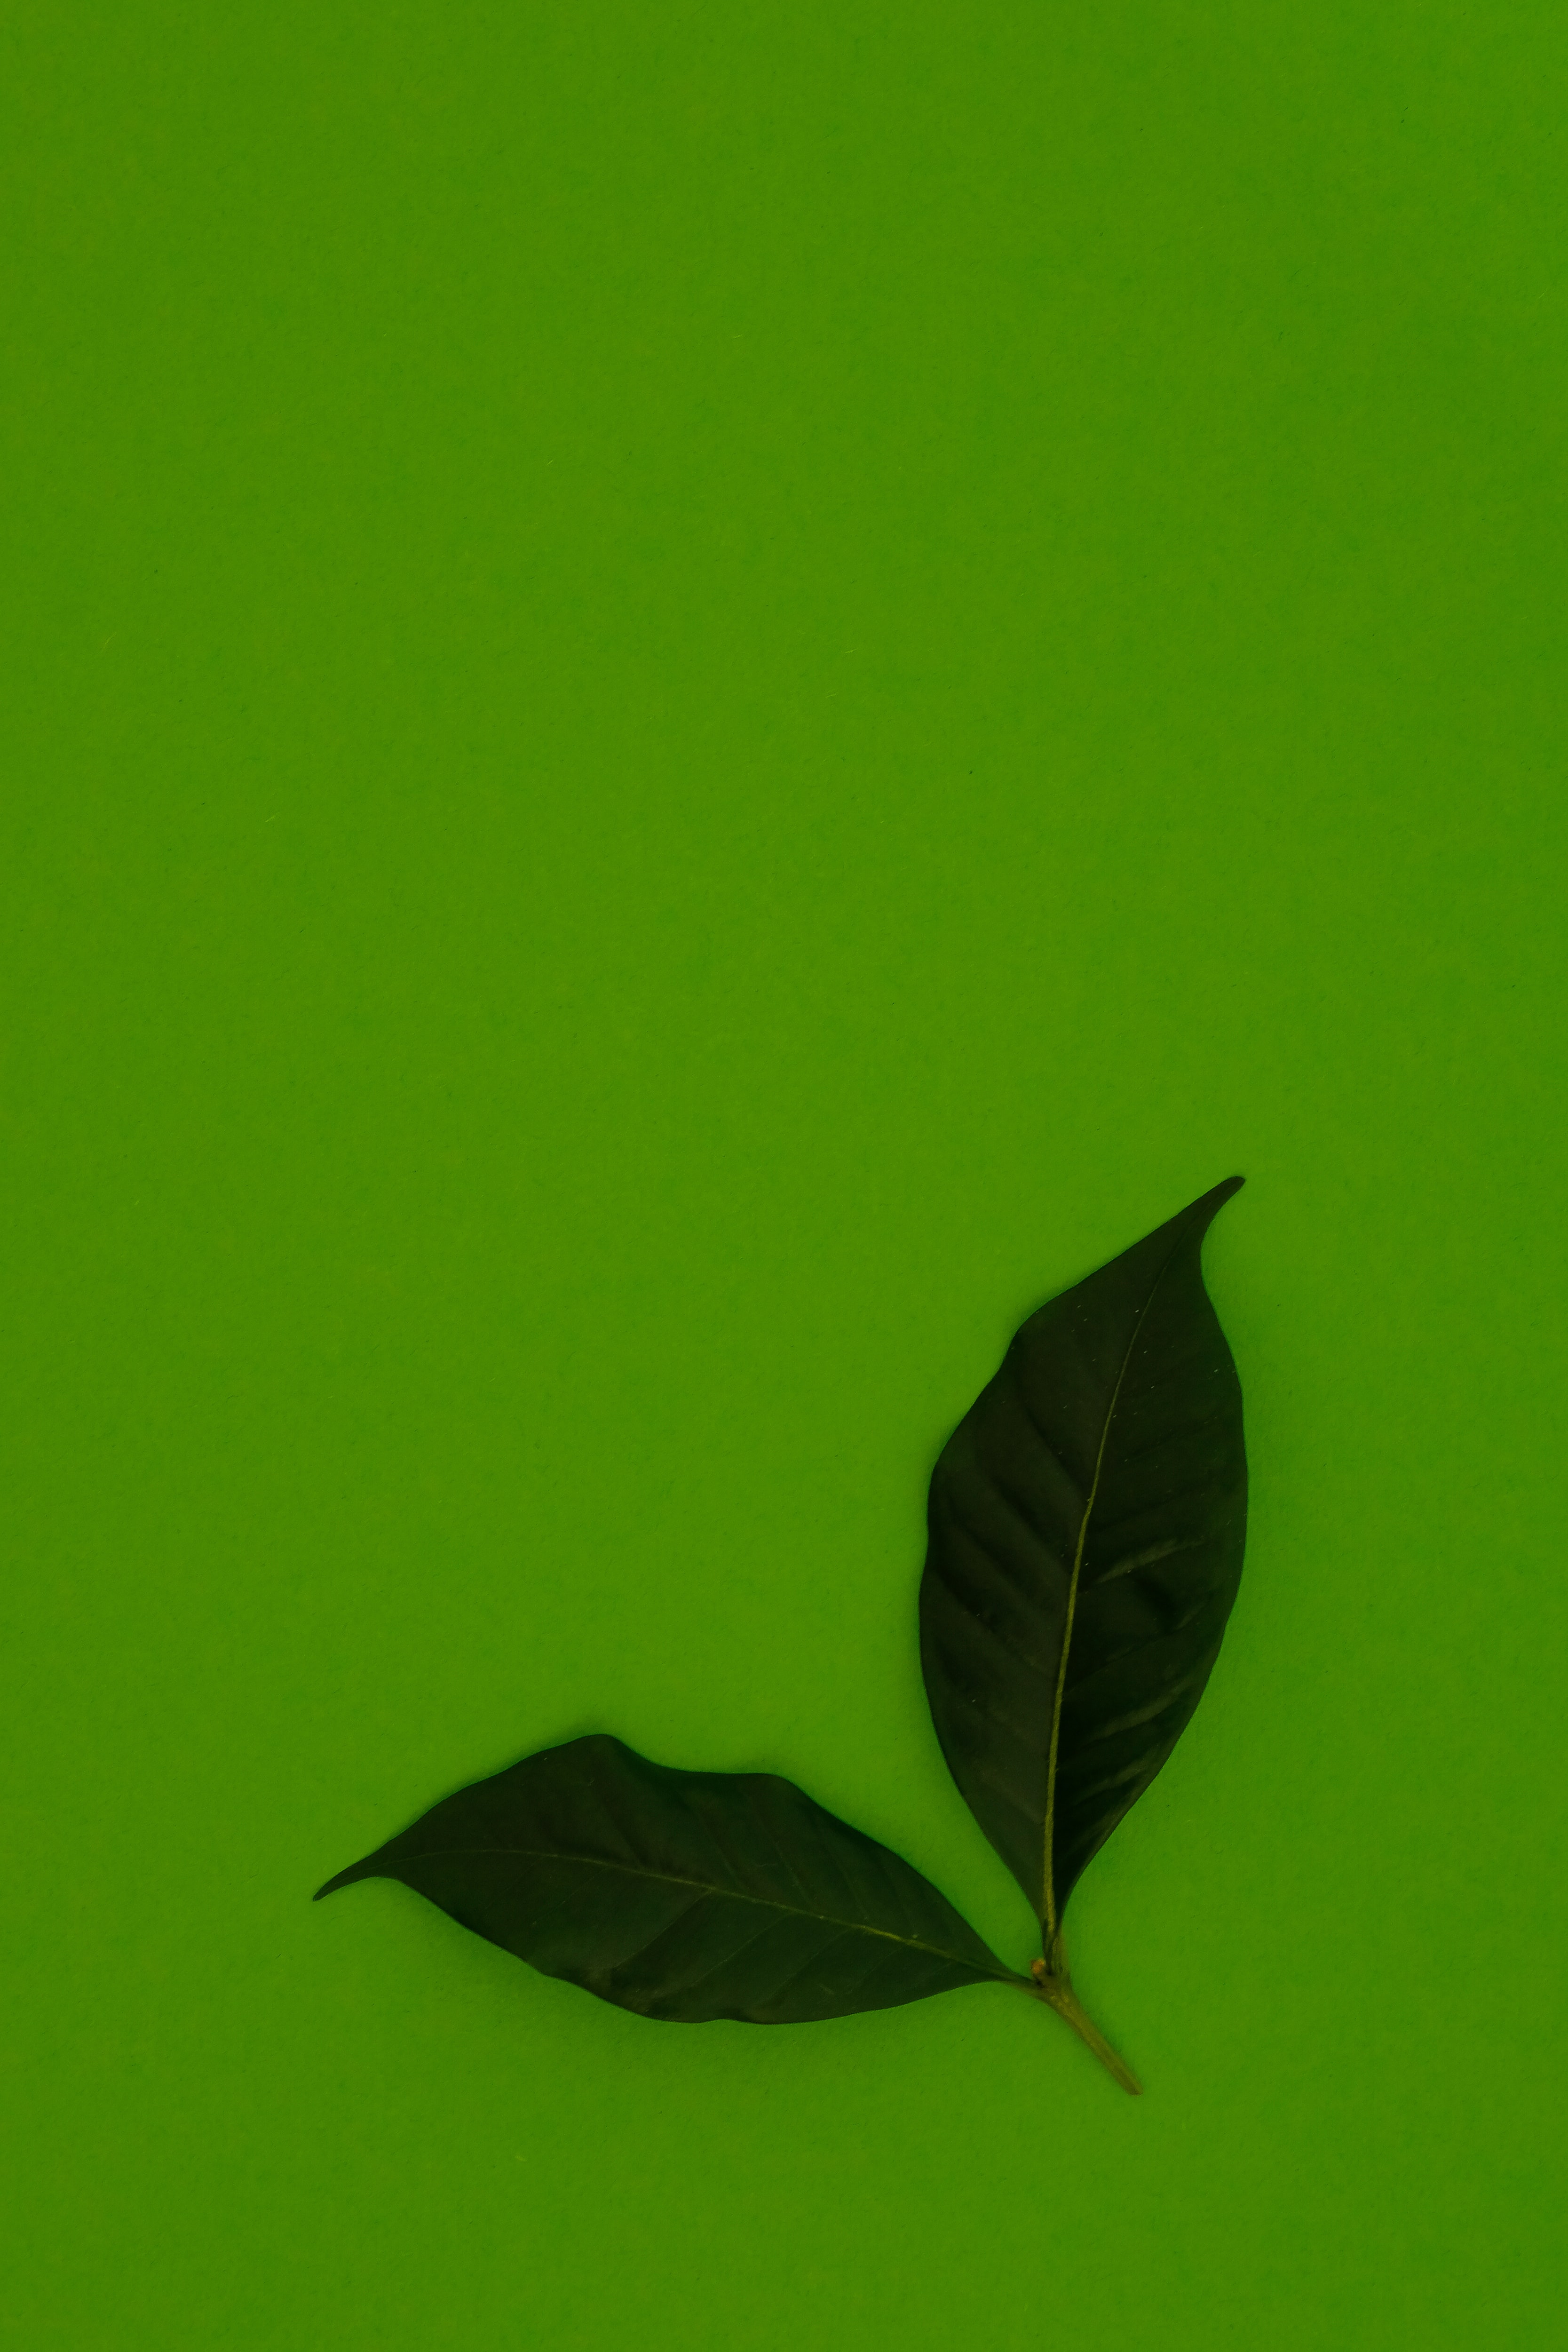 miscellanea, background, leaves, green, miscellaneous lock screen backgrounds